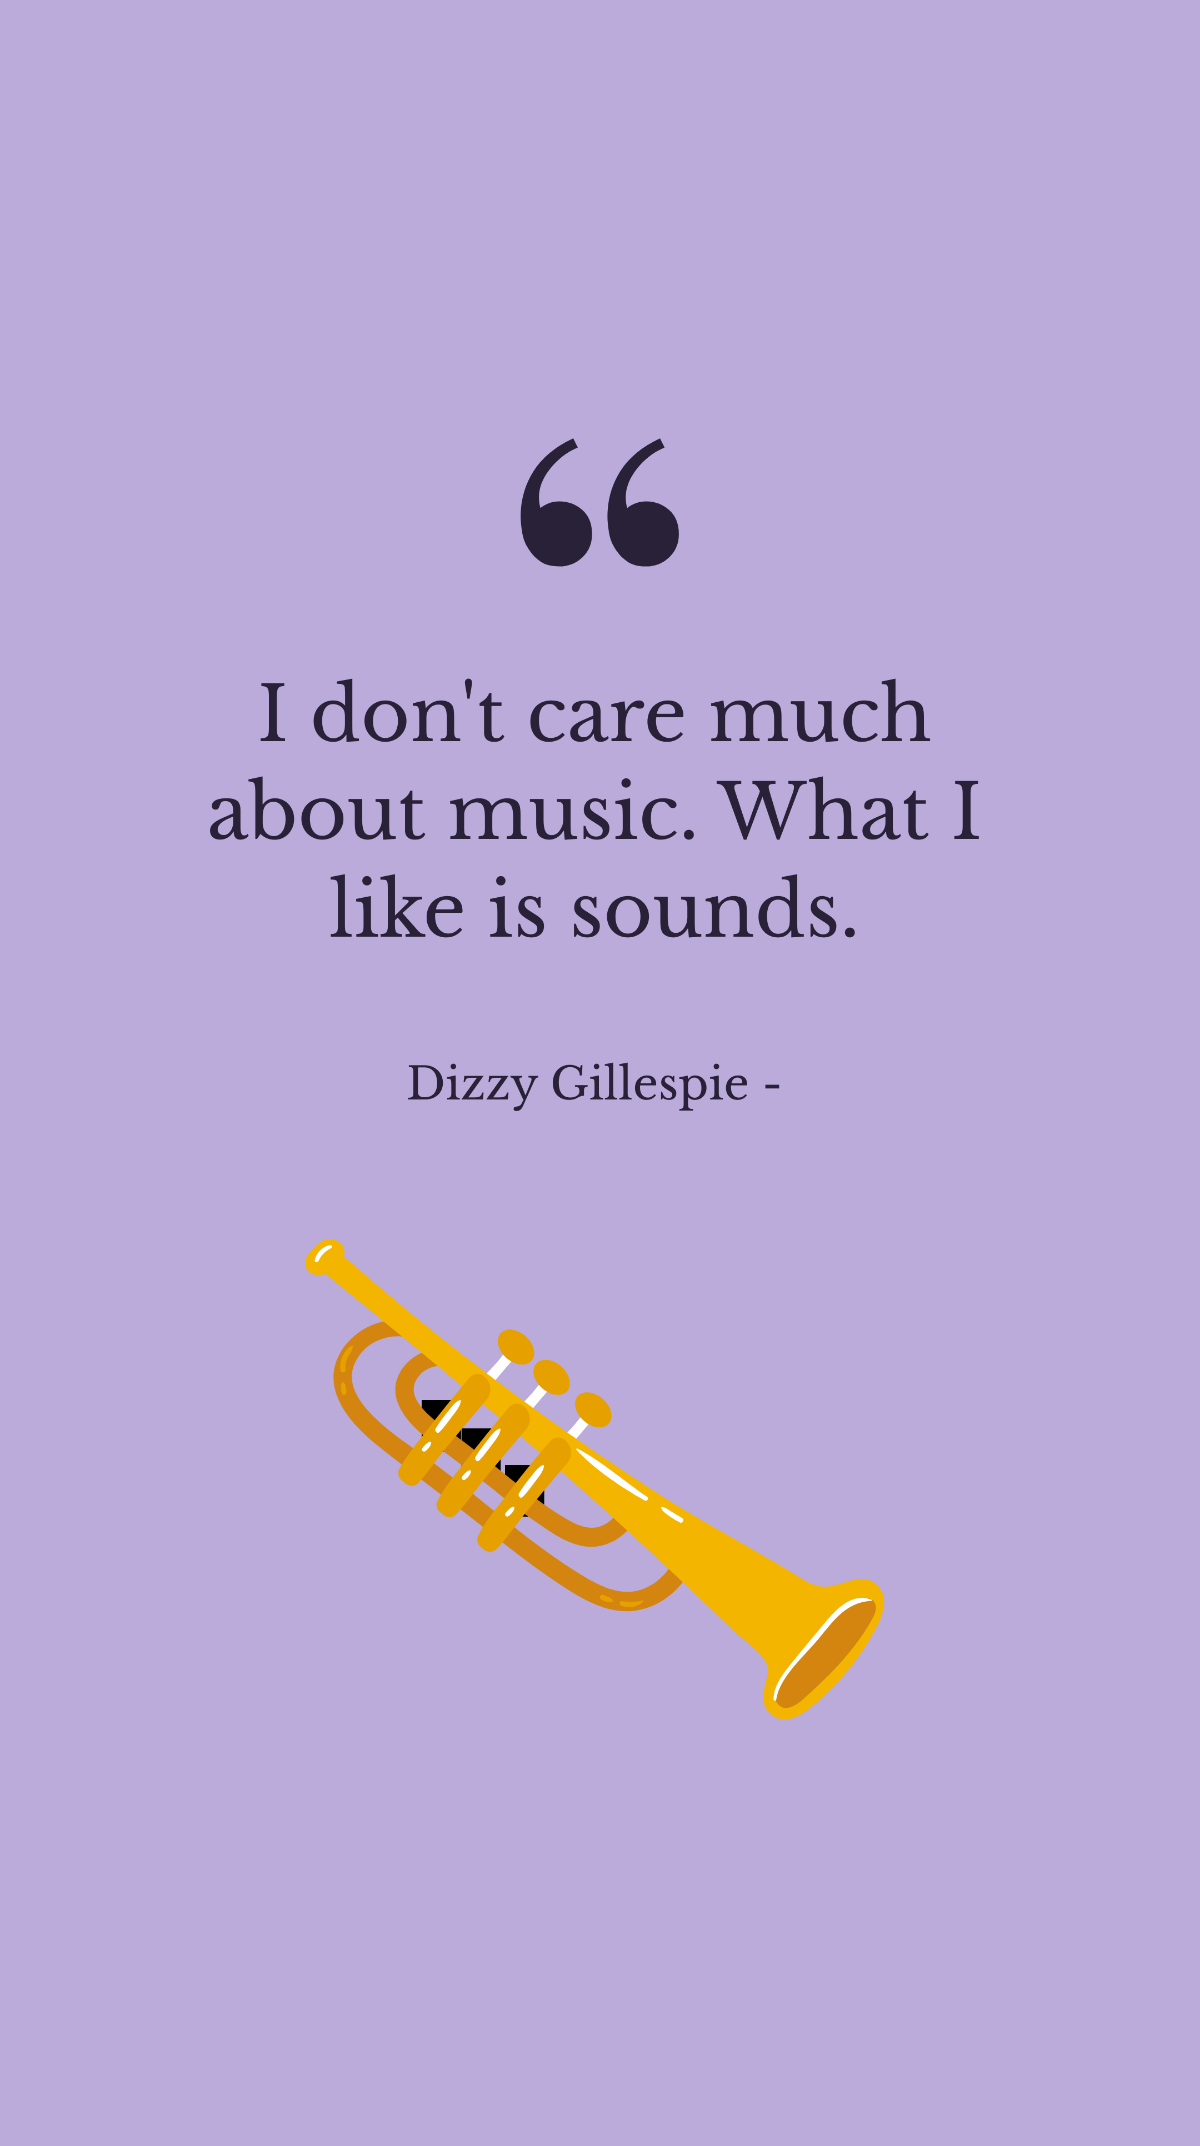 Dizzy Gillespie - I don't care much about music. What I like is sounds. Template